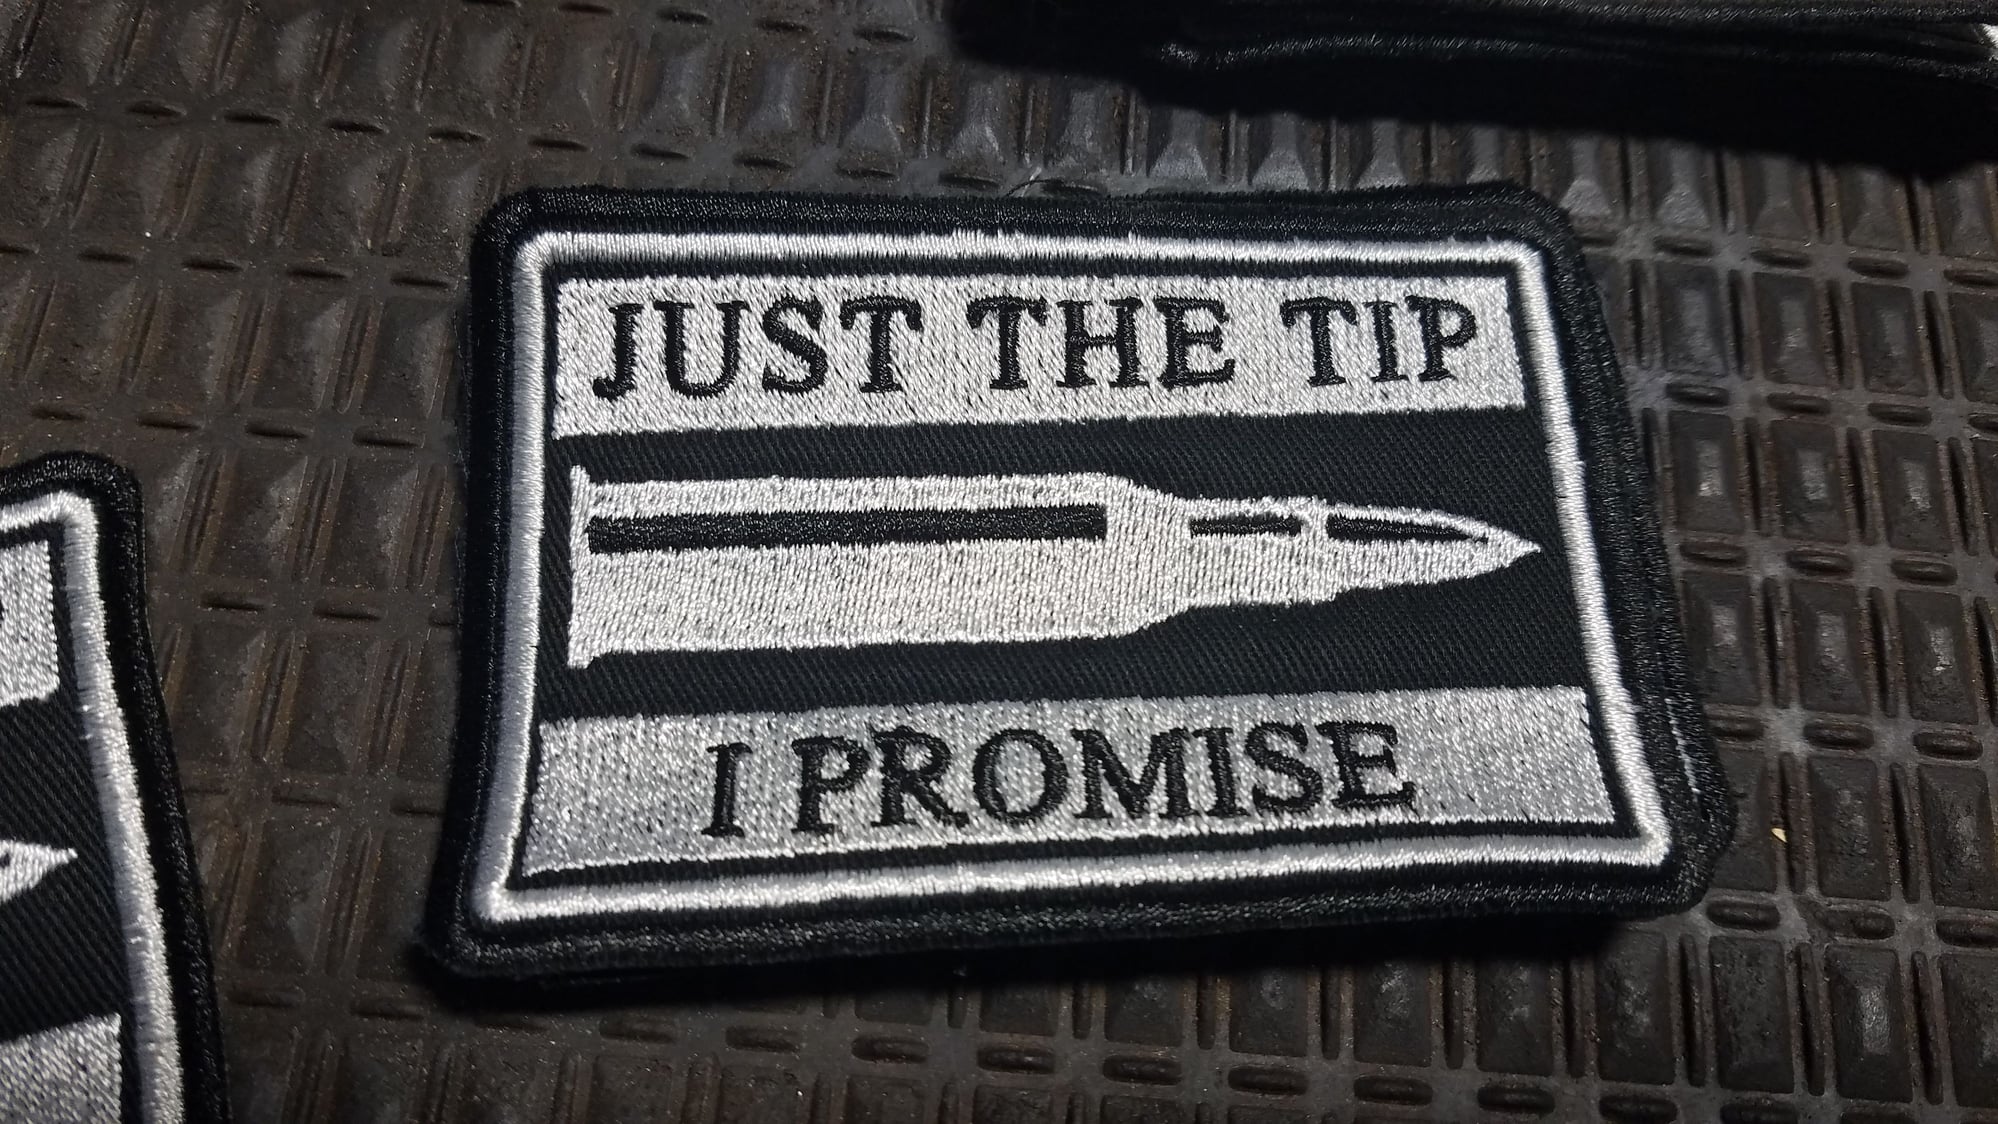 Just the tip patch - Harley Davidson Forums